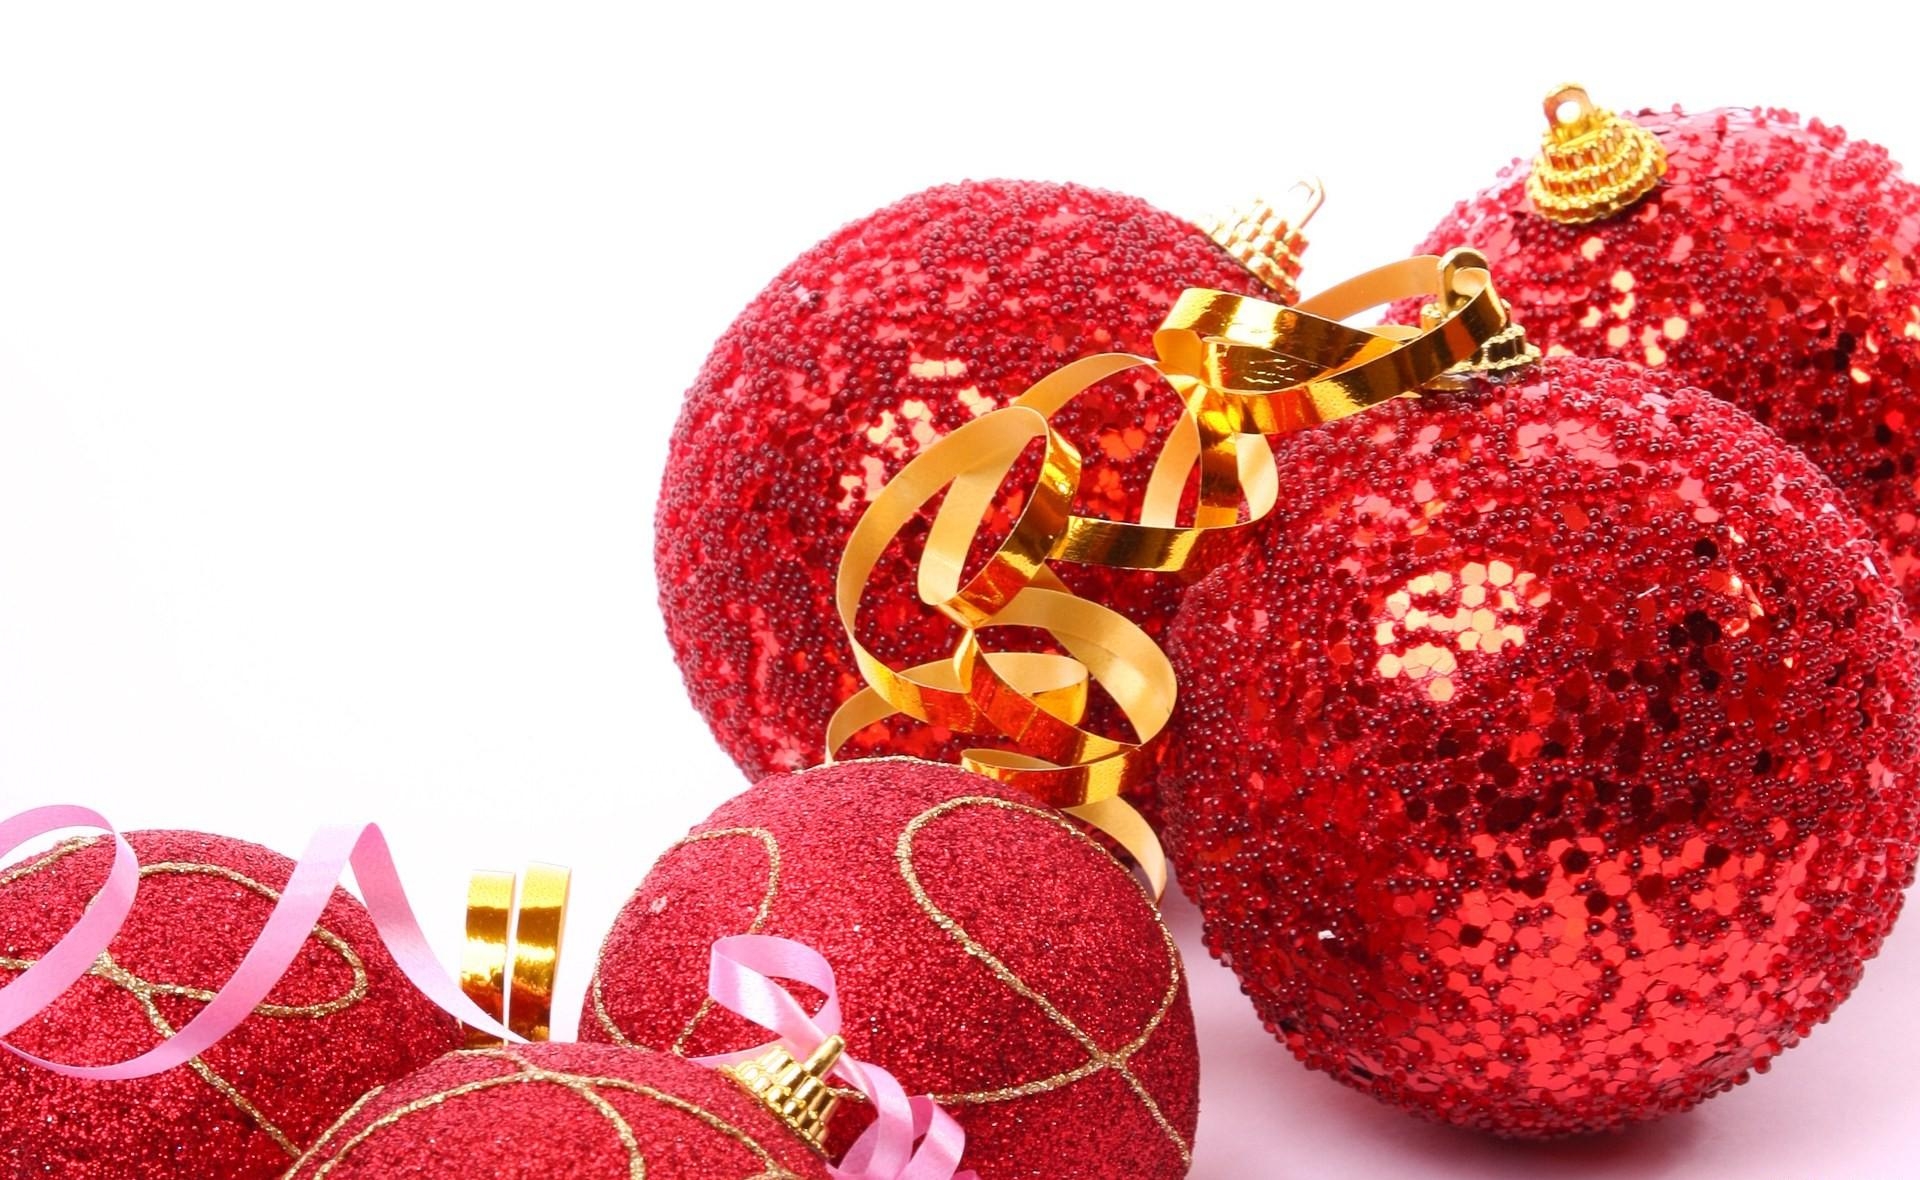 holidays, red, tape, christmas decorations, christmas tree toys, tinsel, balls, sequins Full HD